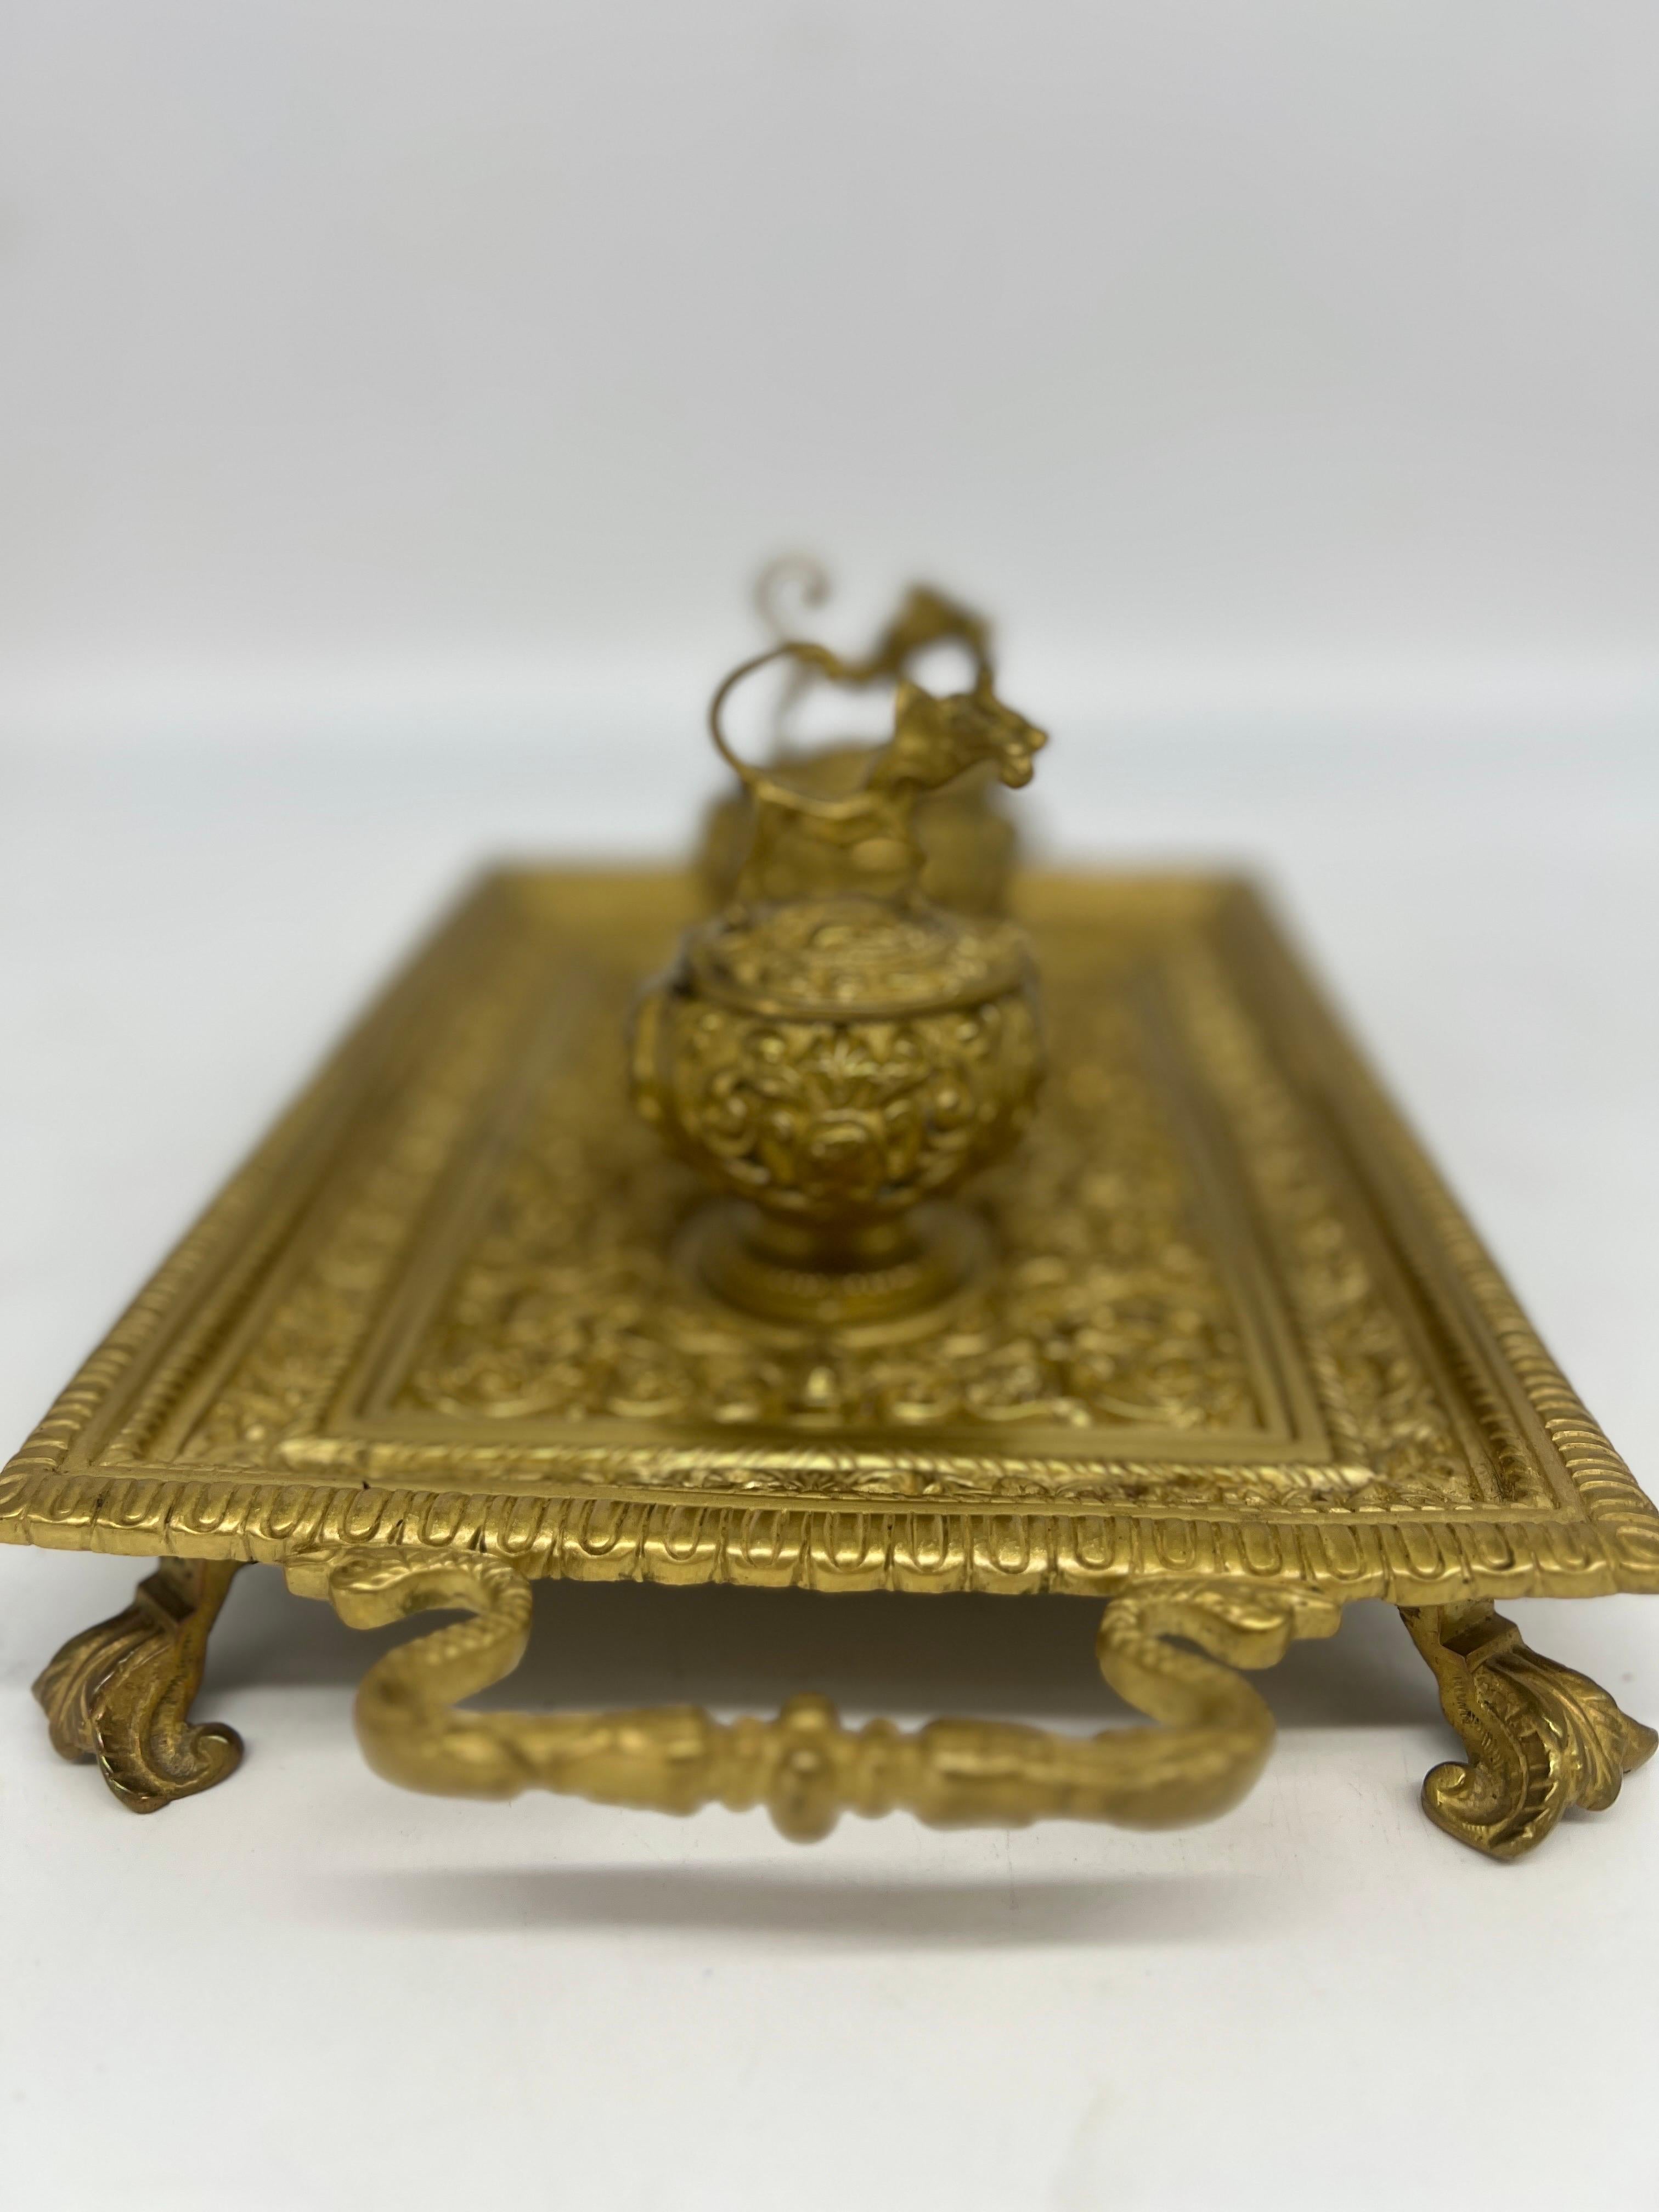 Emancipation Proclamation Inkstand - 19th Century Heavily Chased Brass For Sale 2